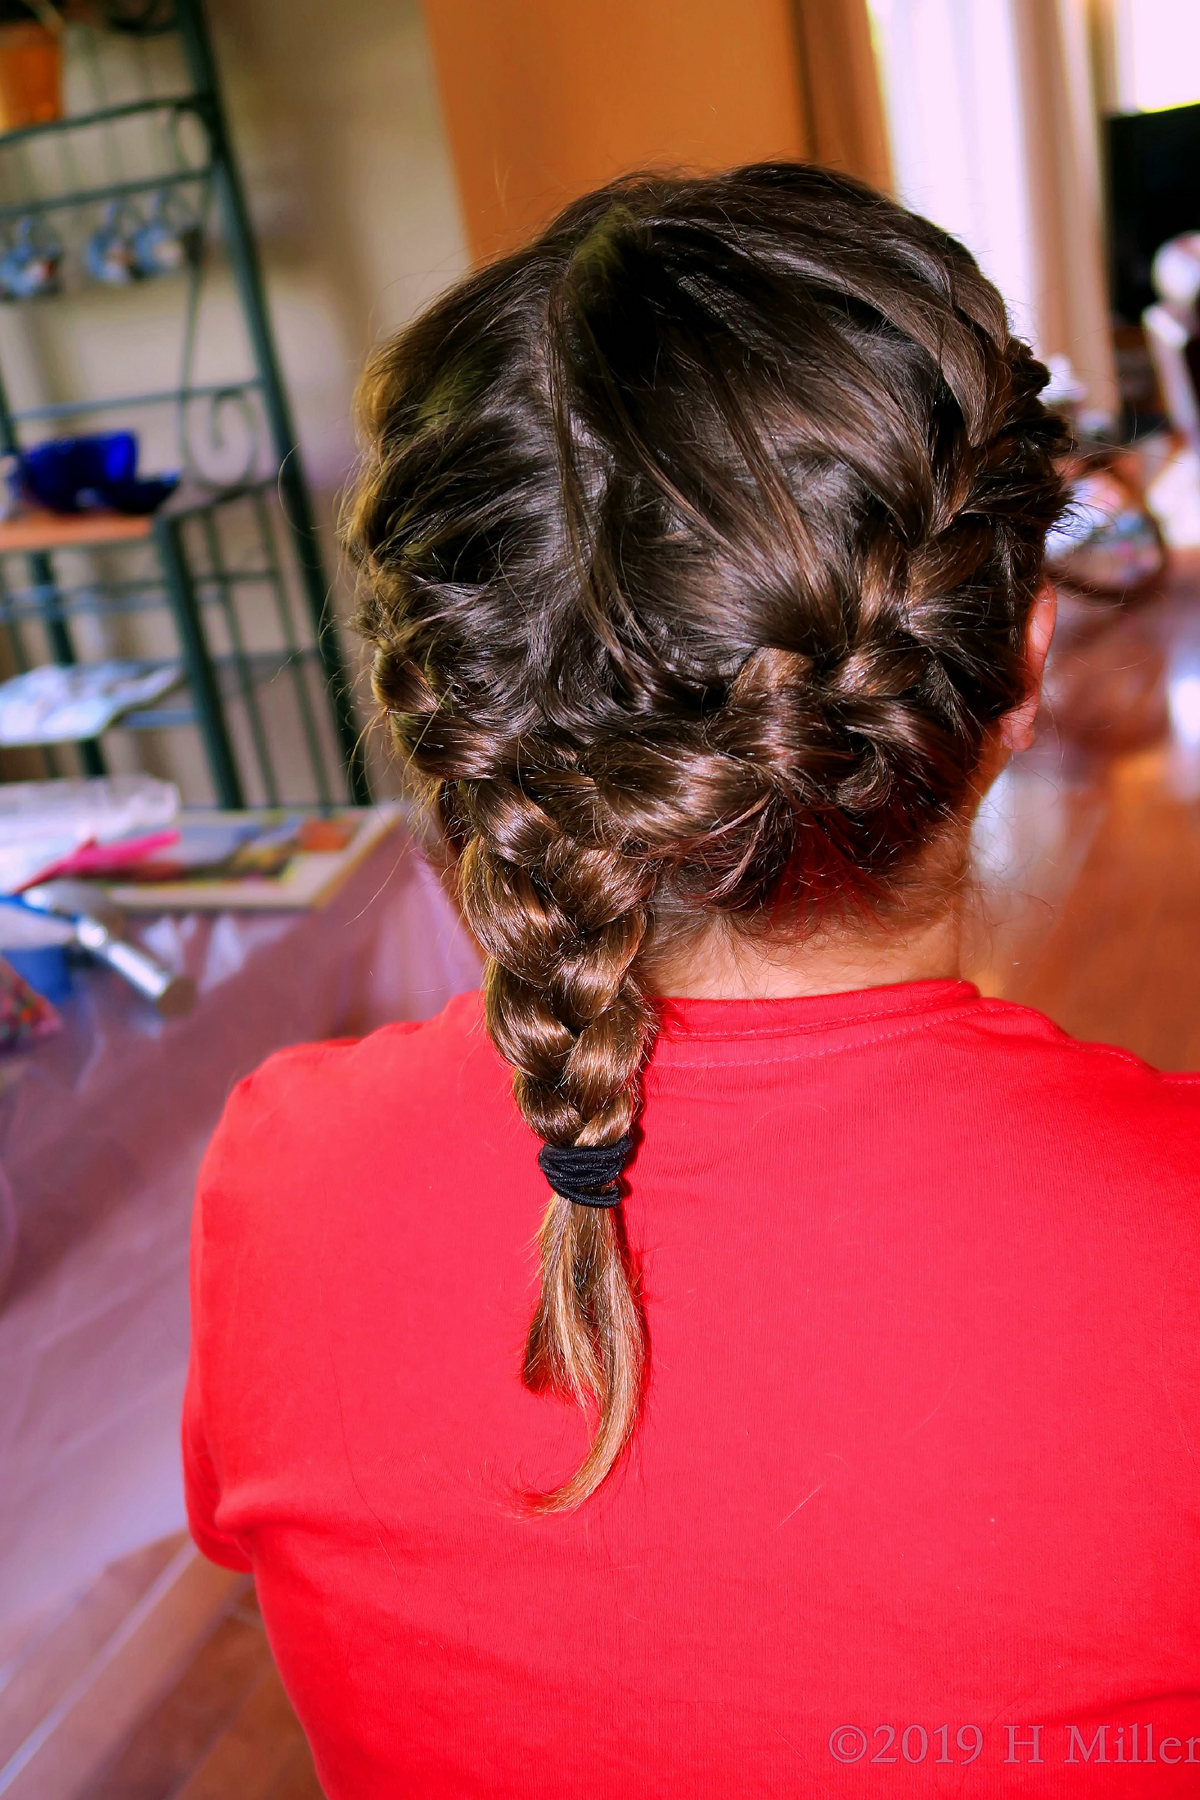 Pretty Girls Hairstyle, In Hairstyling Session At The Kids Spa! 